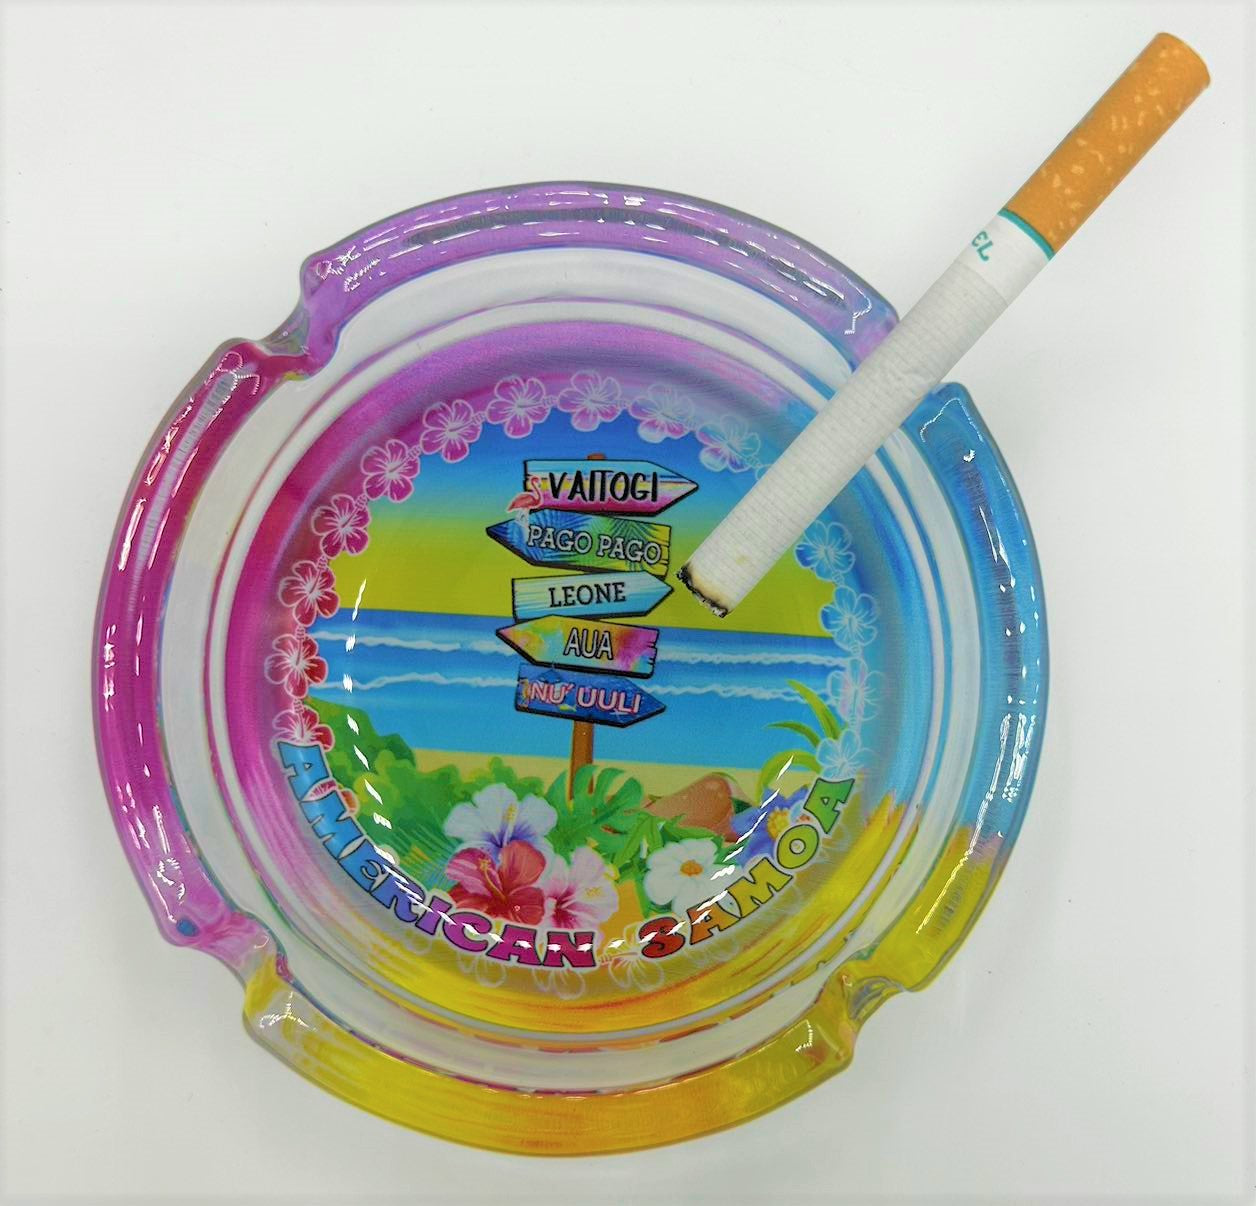 American Samoa Villages design glass ashtray is good for souvenirs